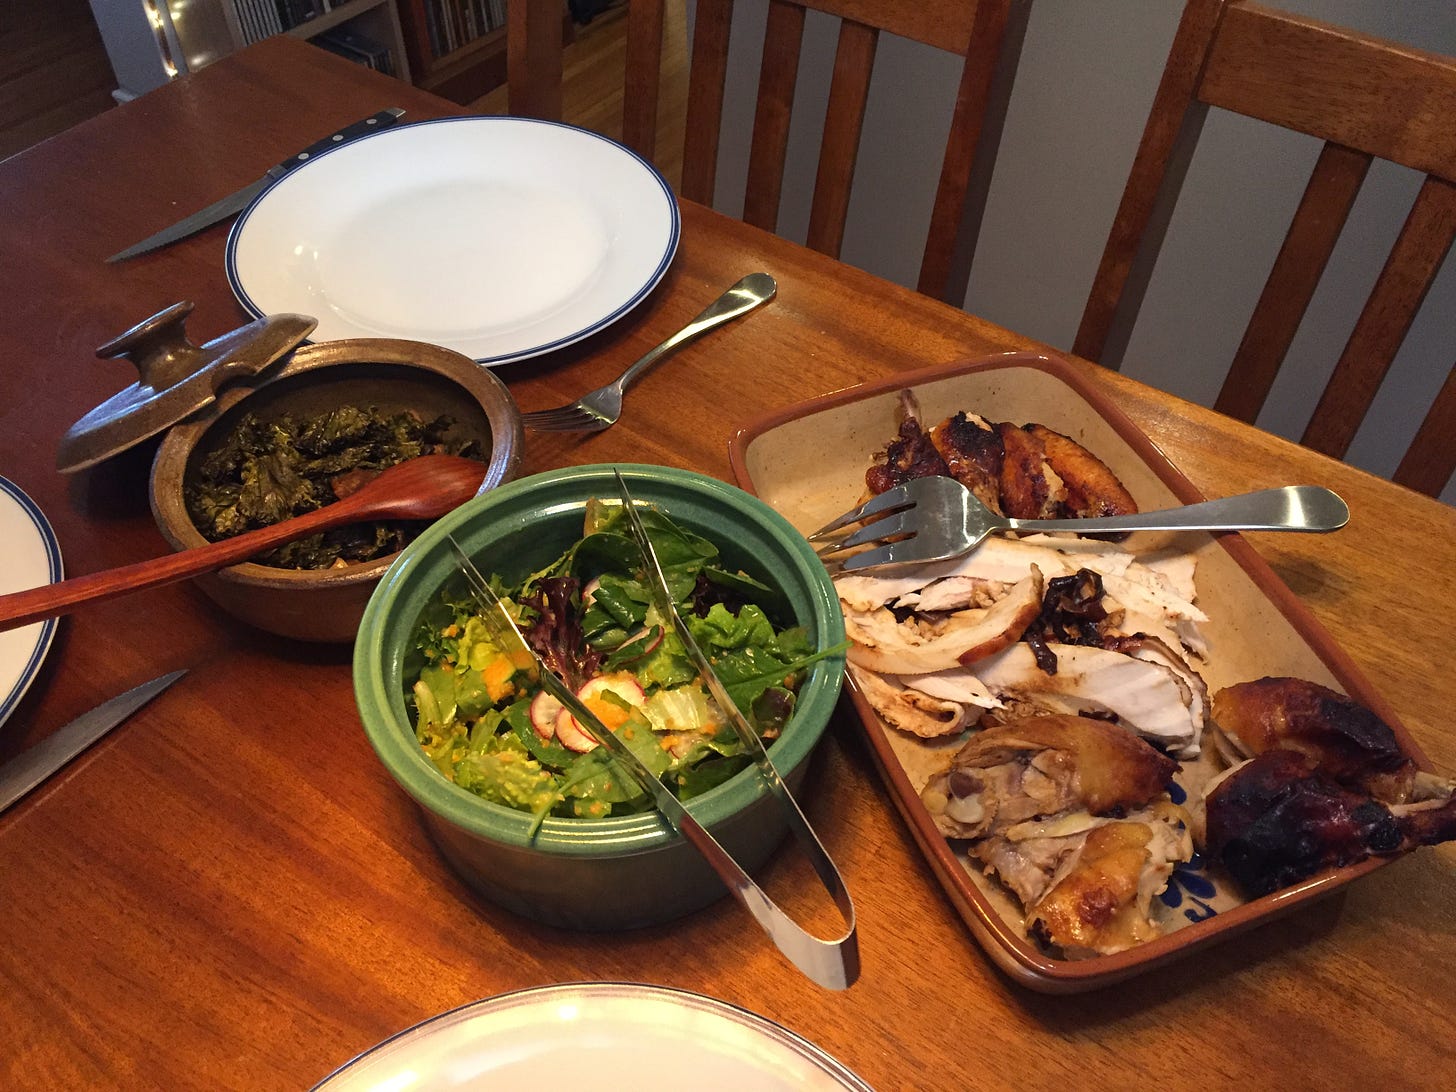 A table set for dinner with three serving dishes in the middle: one small tureen with crispy kale and mushrooms, a green ceramic bowl of salad, and a rectangular dish with carved pieces of chicken.